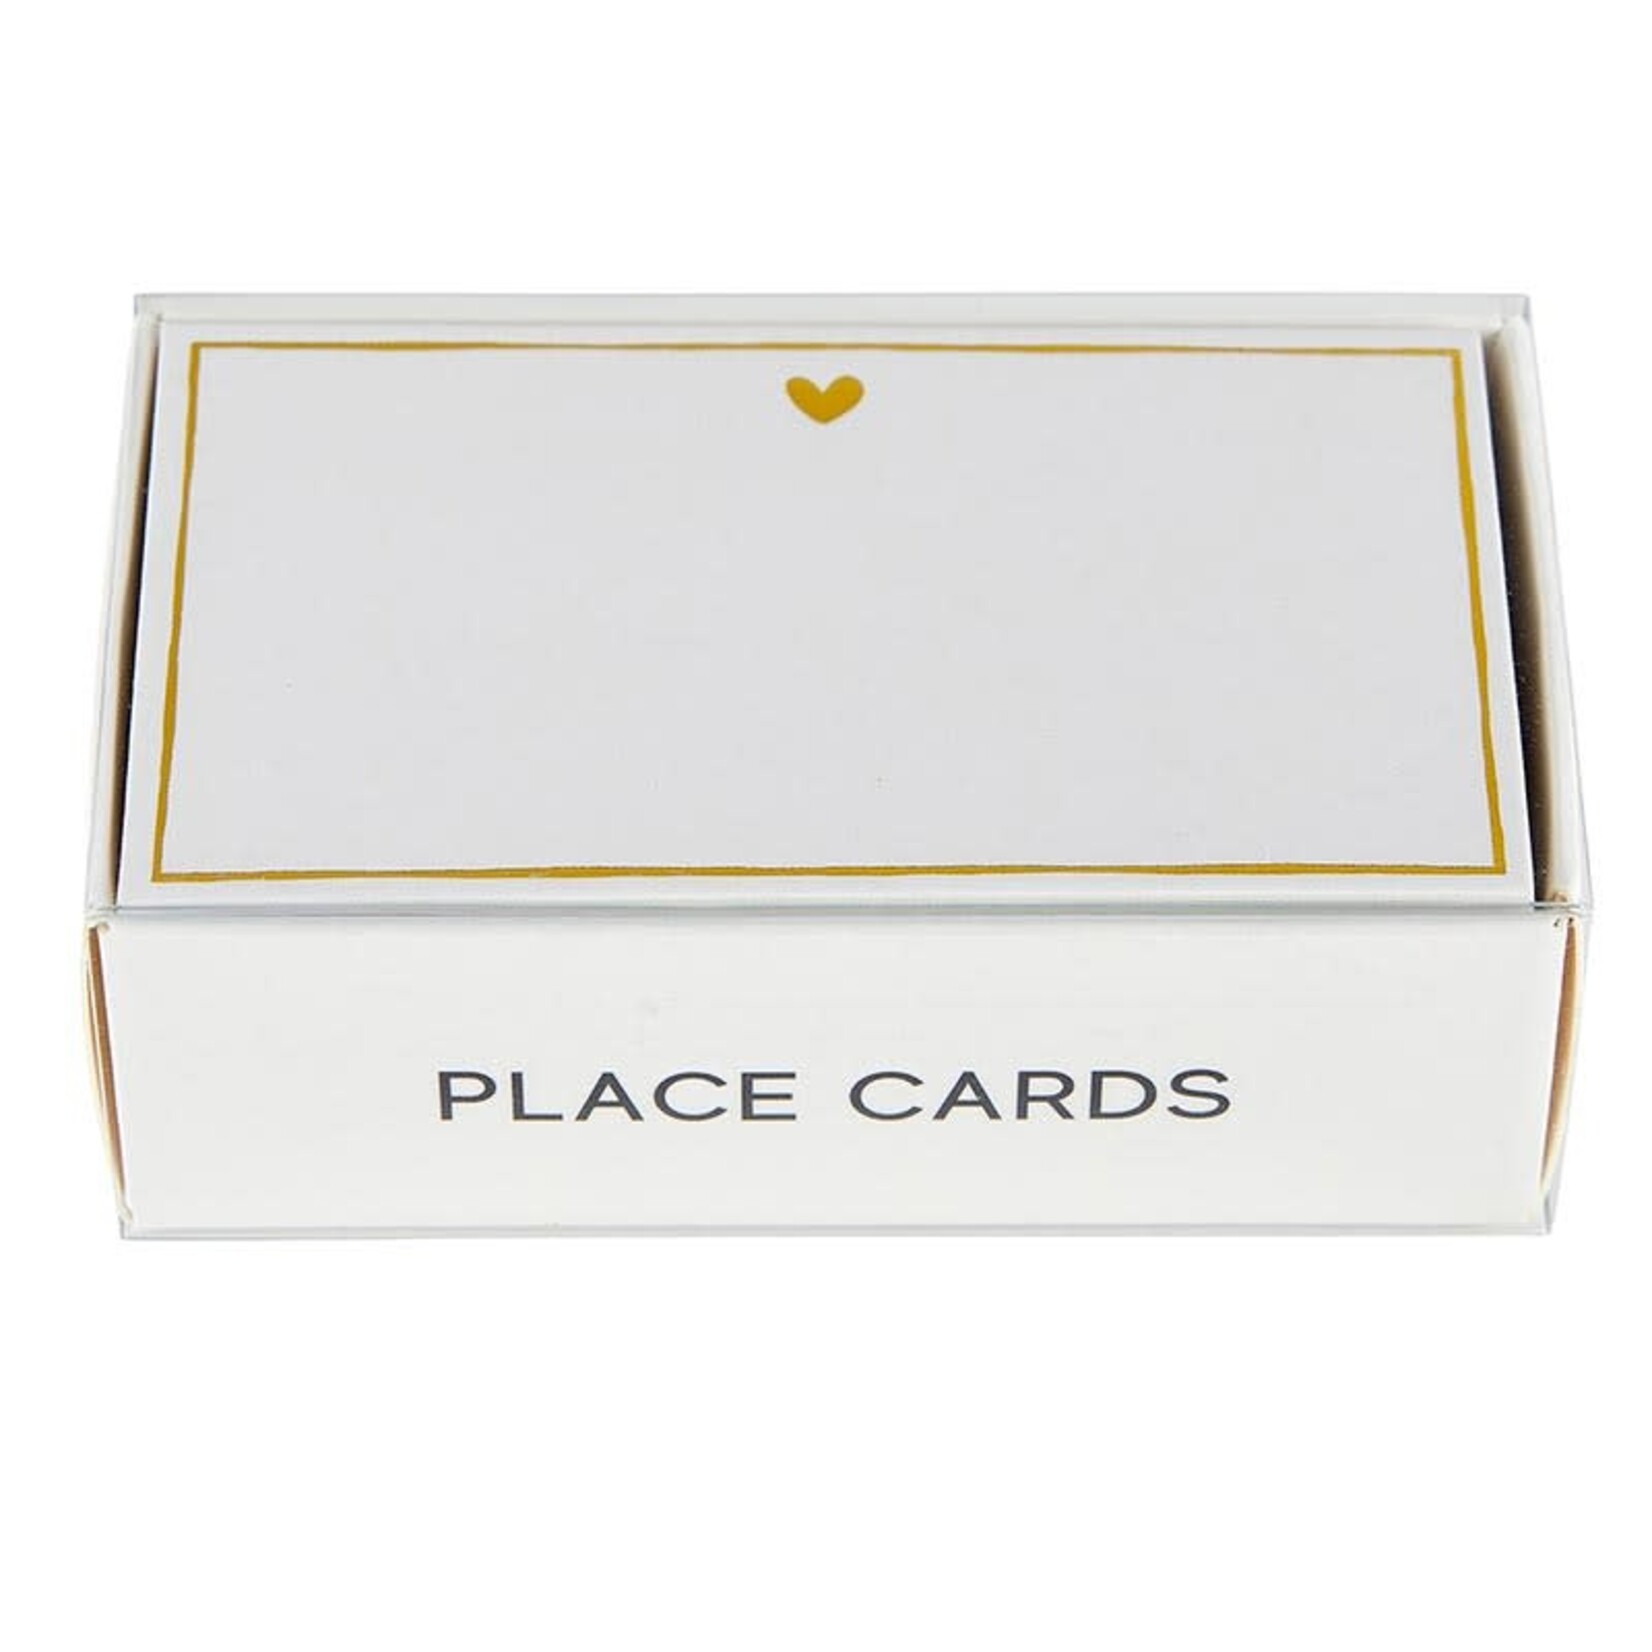 Outside The Box 3.5" x 2" Heart Gold Foil Place Cards [Qty 36]